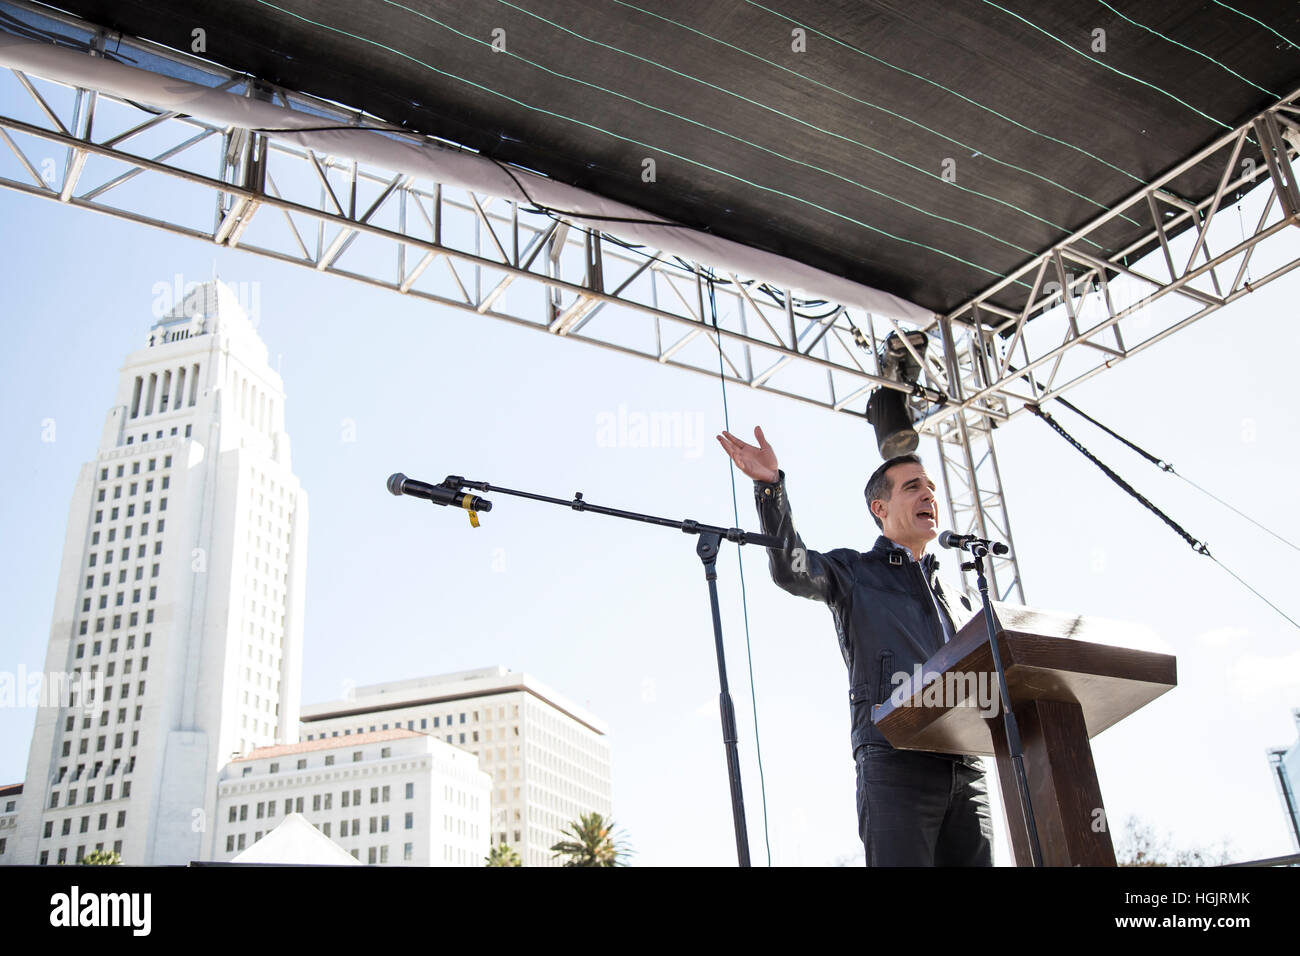 Los Angeles, USA. 21st January, 2017. Los Angeles Mayor Eric Garcetti addresses the crowd in front of Los Angeles City Hall. Thousands of Angelenos gathered in Downtown Los Angeles to march in solidarity with the Women’s March in Washington, DC, protesting Donald Trump’s policies and rhtetoric. Credit: Andie Mills/Alamy Live News Stock Photo